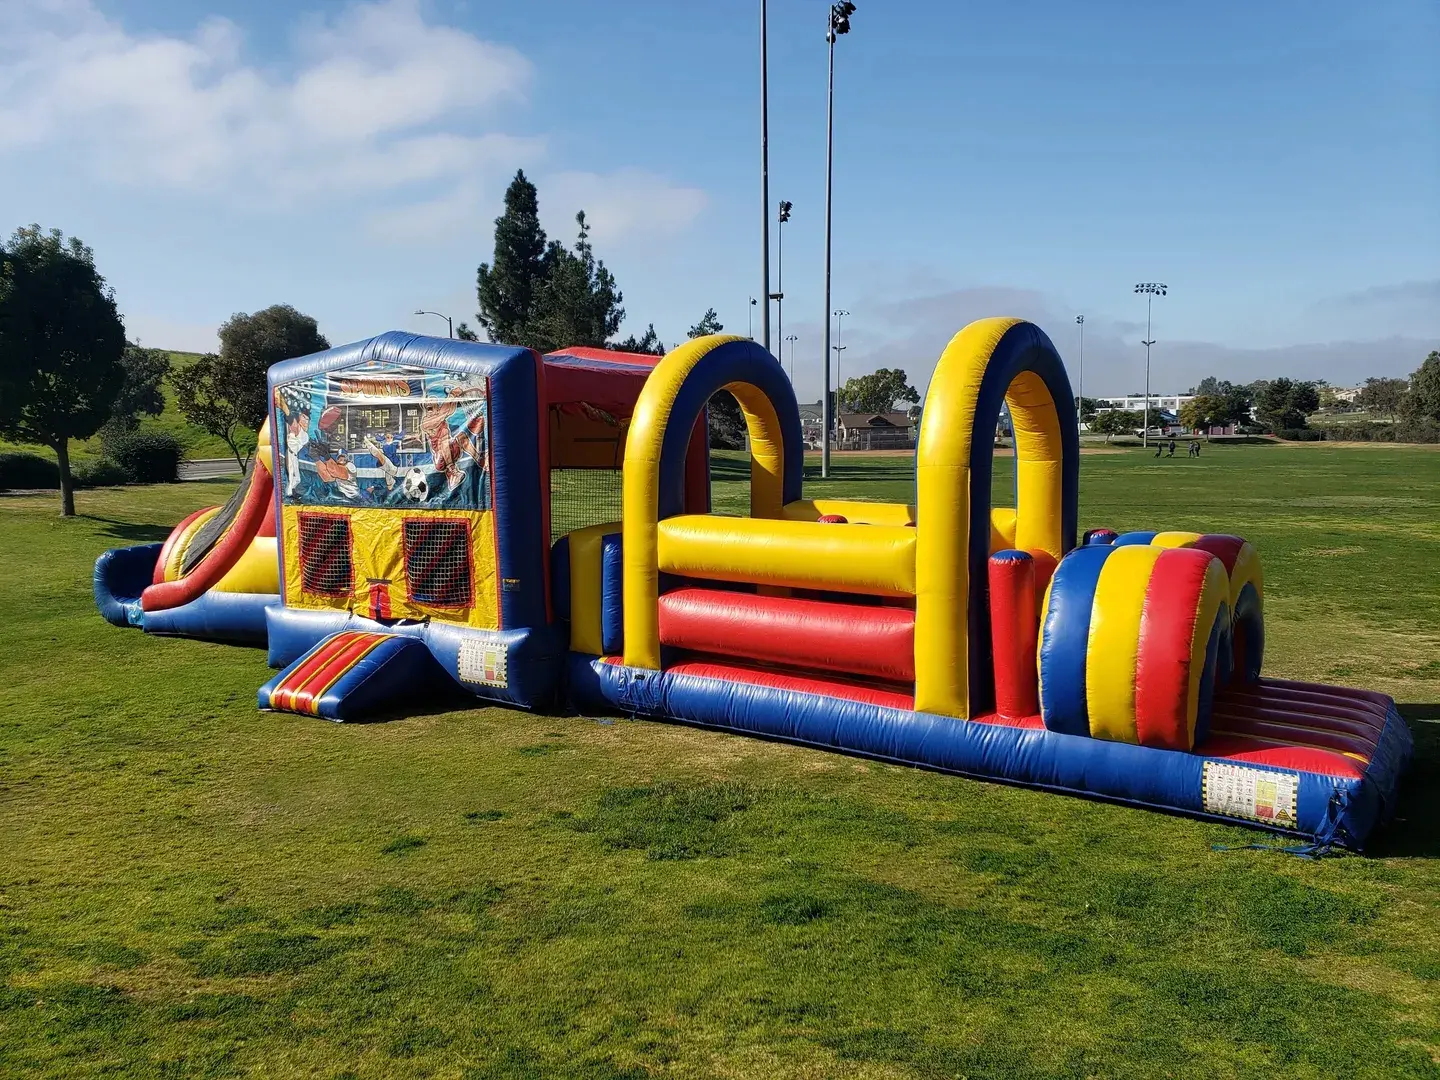 A large inflatable obstacle course set up in the grass.